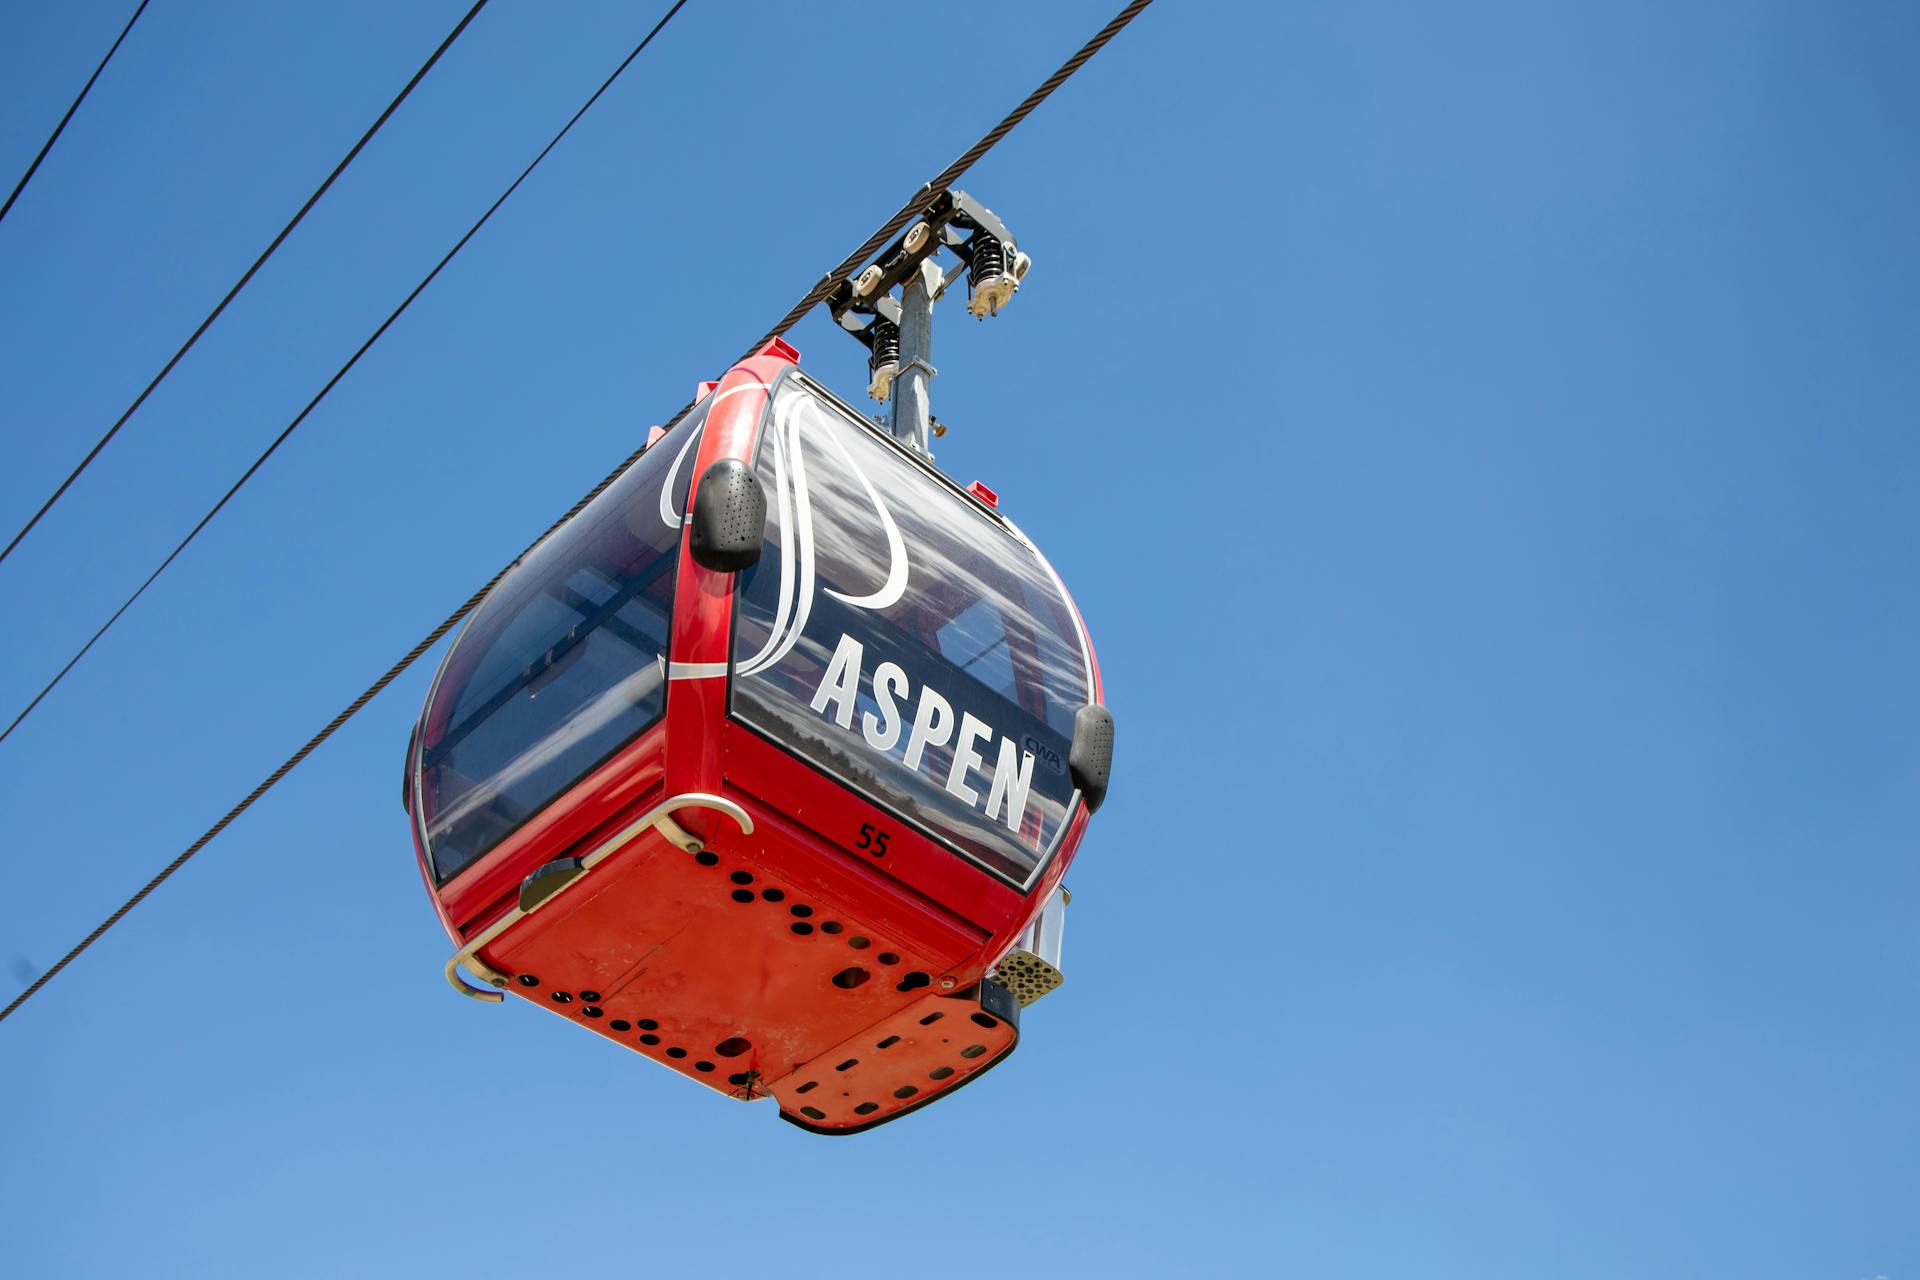 Red cable car with Aspen on written on the front